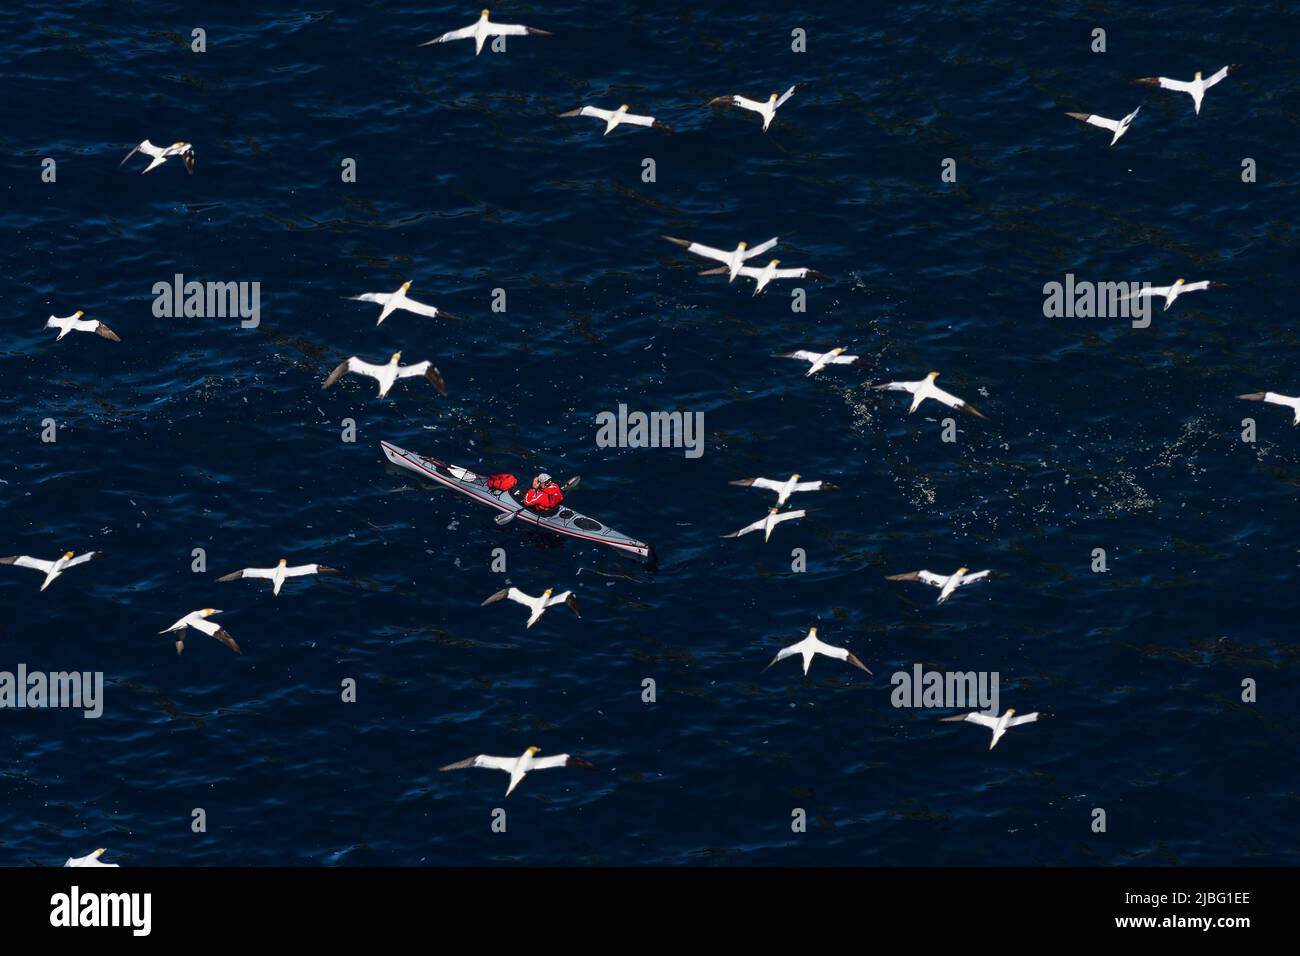 High angle view of seagulls flying over man in kayak Stock Photo